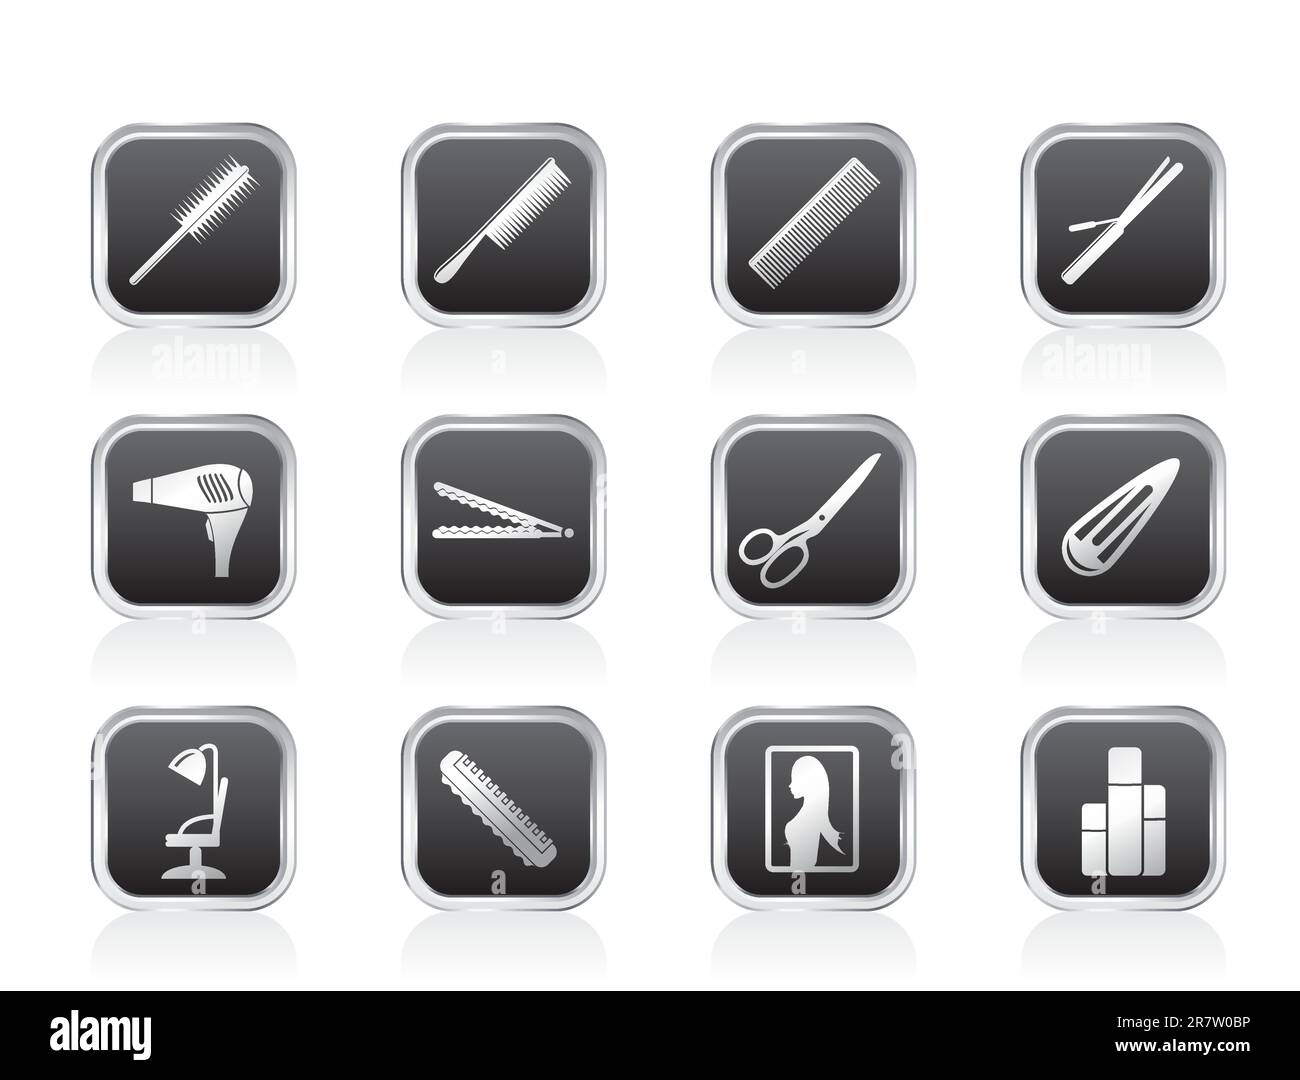 hairdressing, coiffure and make-up icons - vector Icon Set Stock Vector